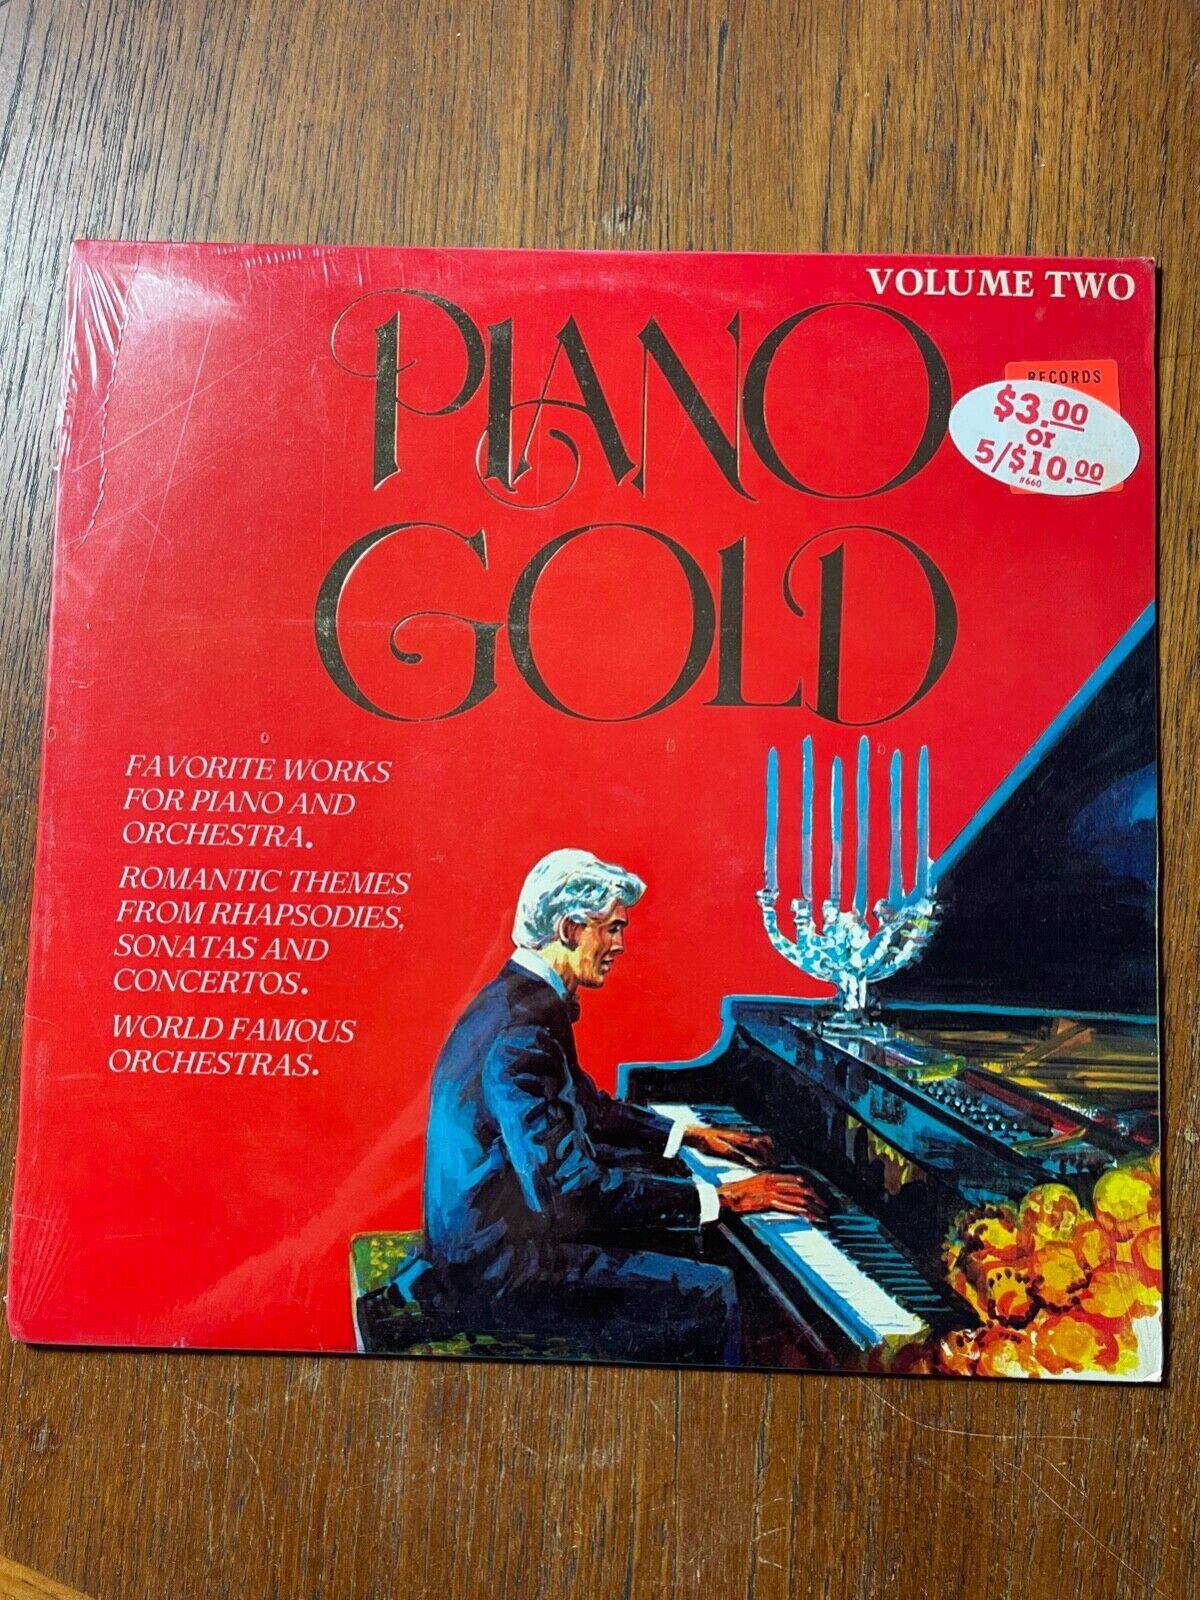 VINTAGE PIANO GOLD VOLUME TWO LP RECORD BRAND NEW SEALED